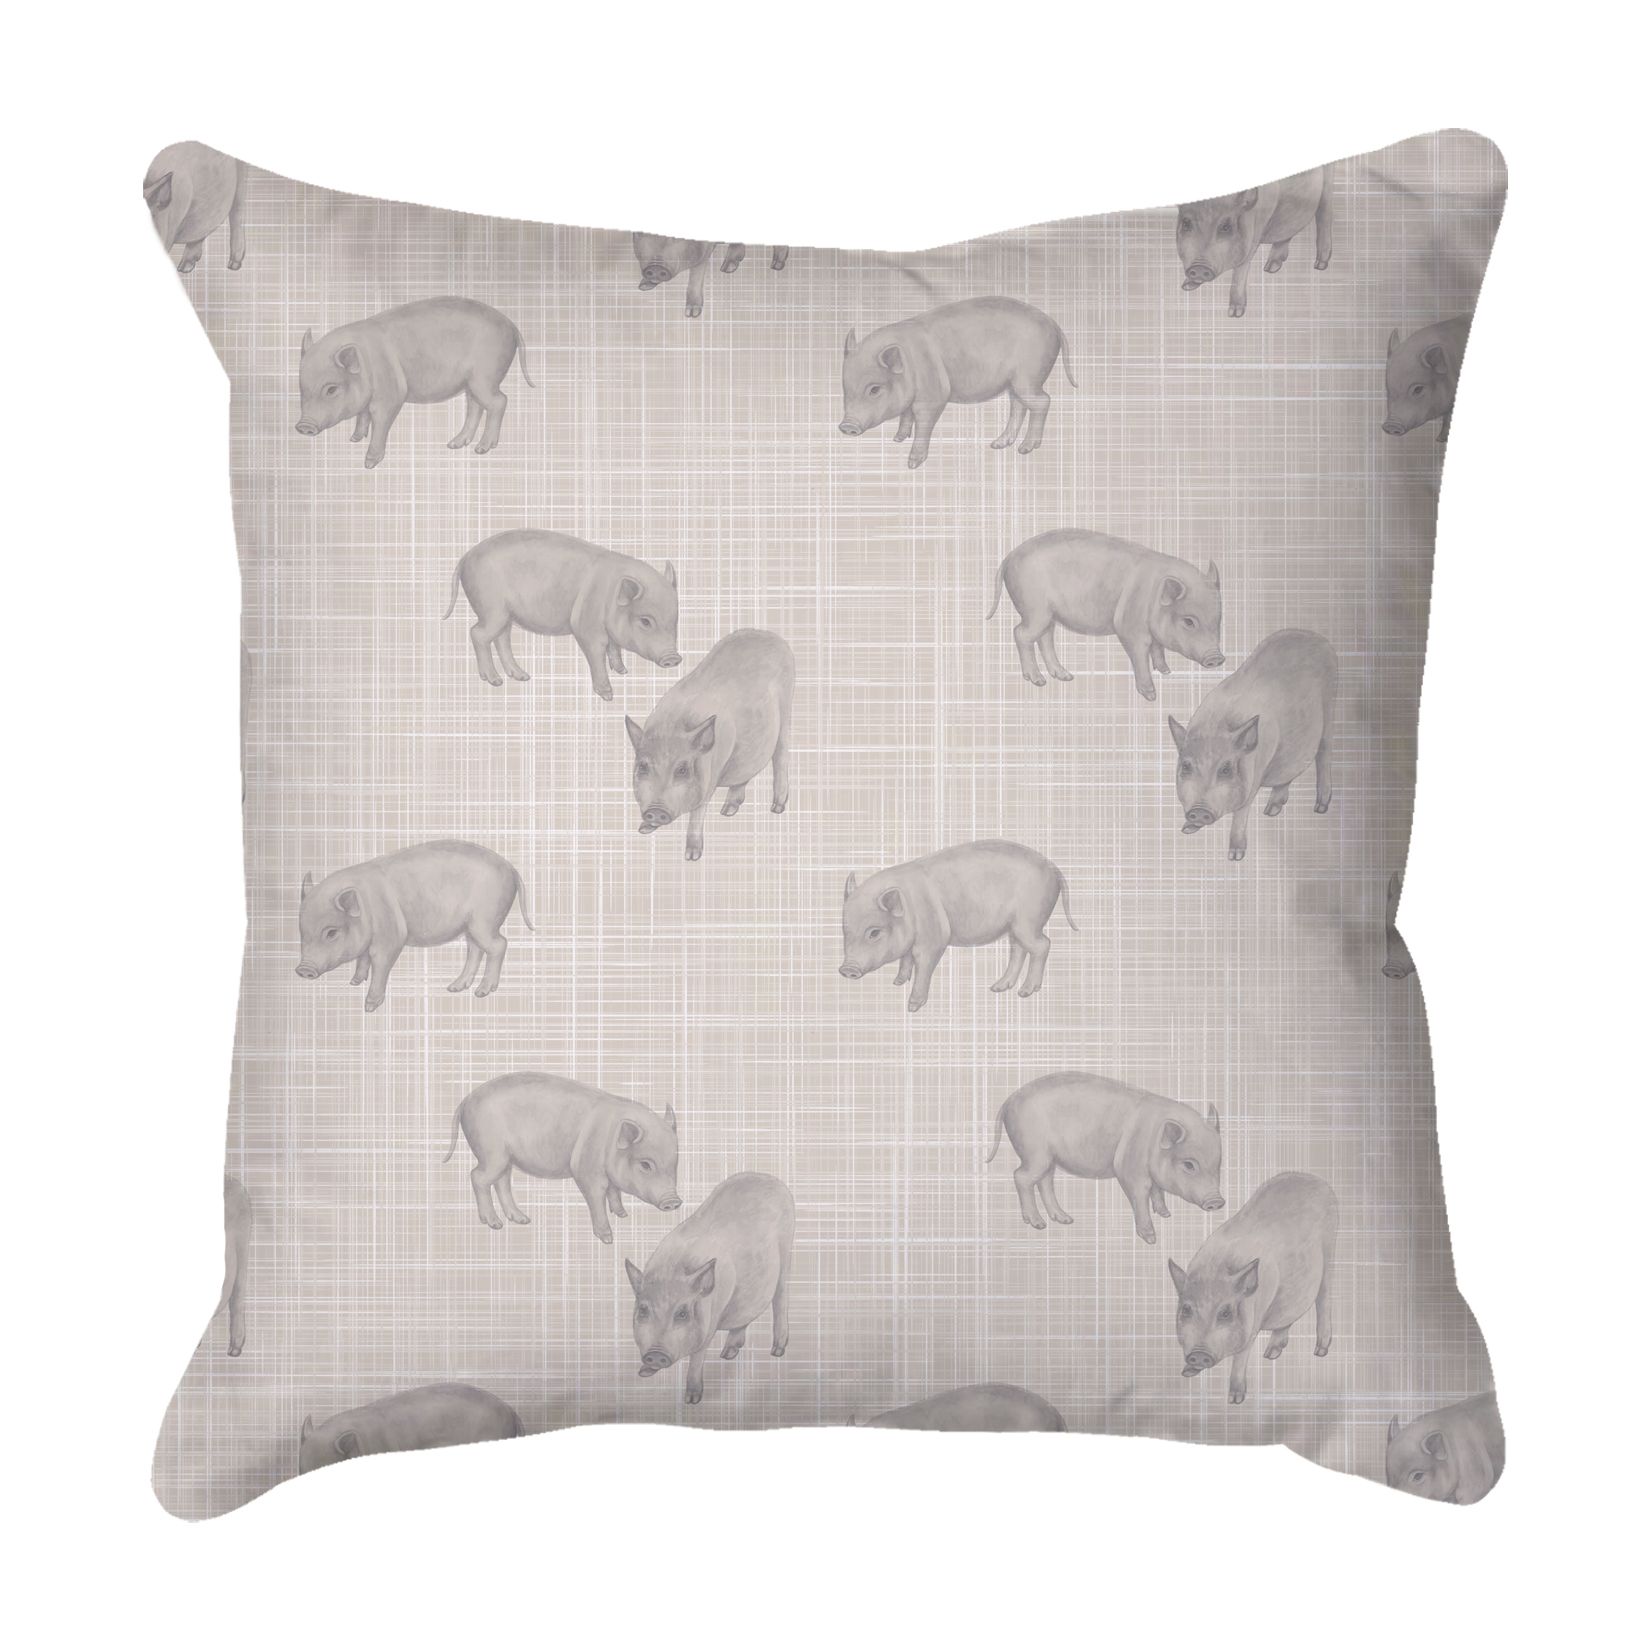 Pigs Scatter Cushion